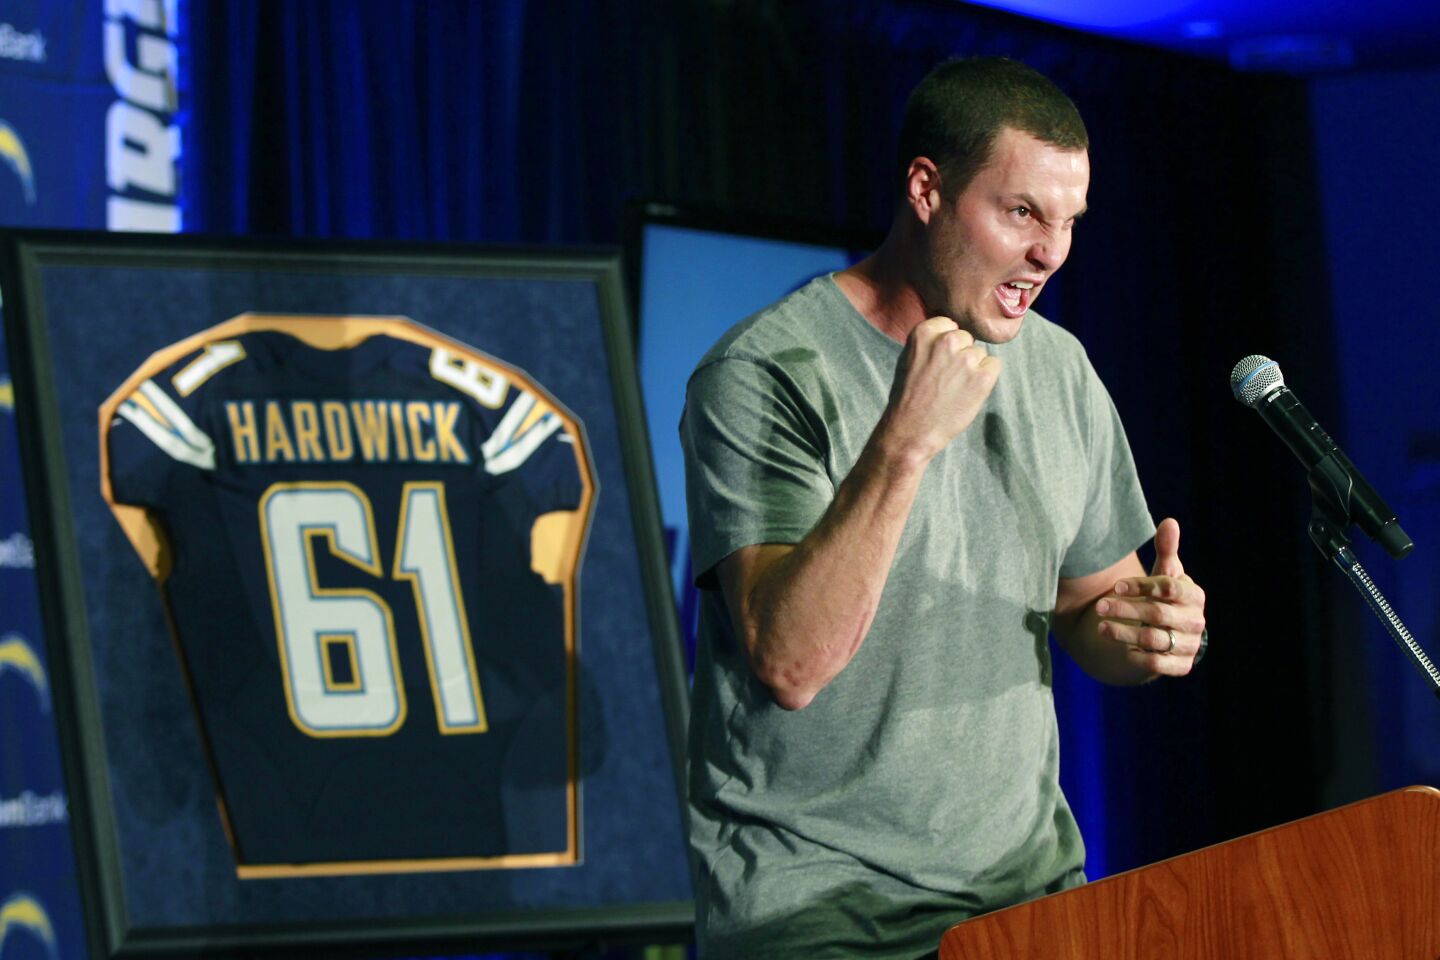 Chargers quarterback Philip Rivers speaks about center Nick Hardwick, who announced his retirement after 11 seasons playing for the team on Feb. 3. 2014.